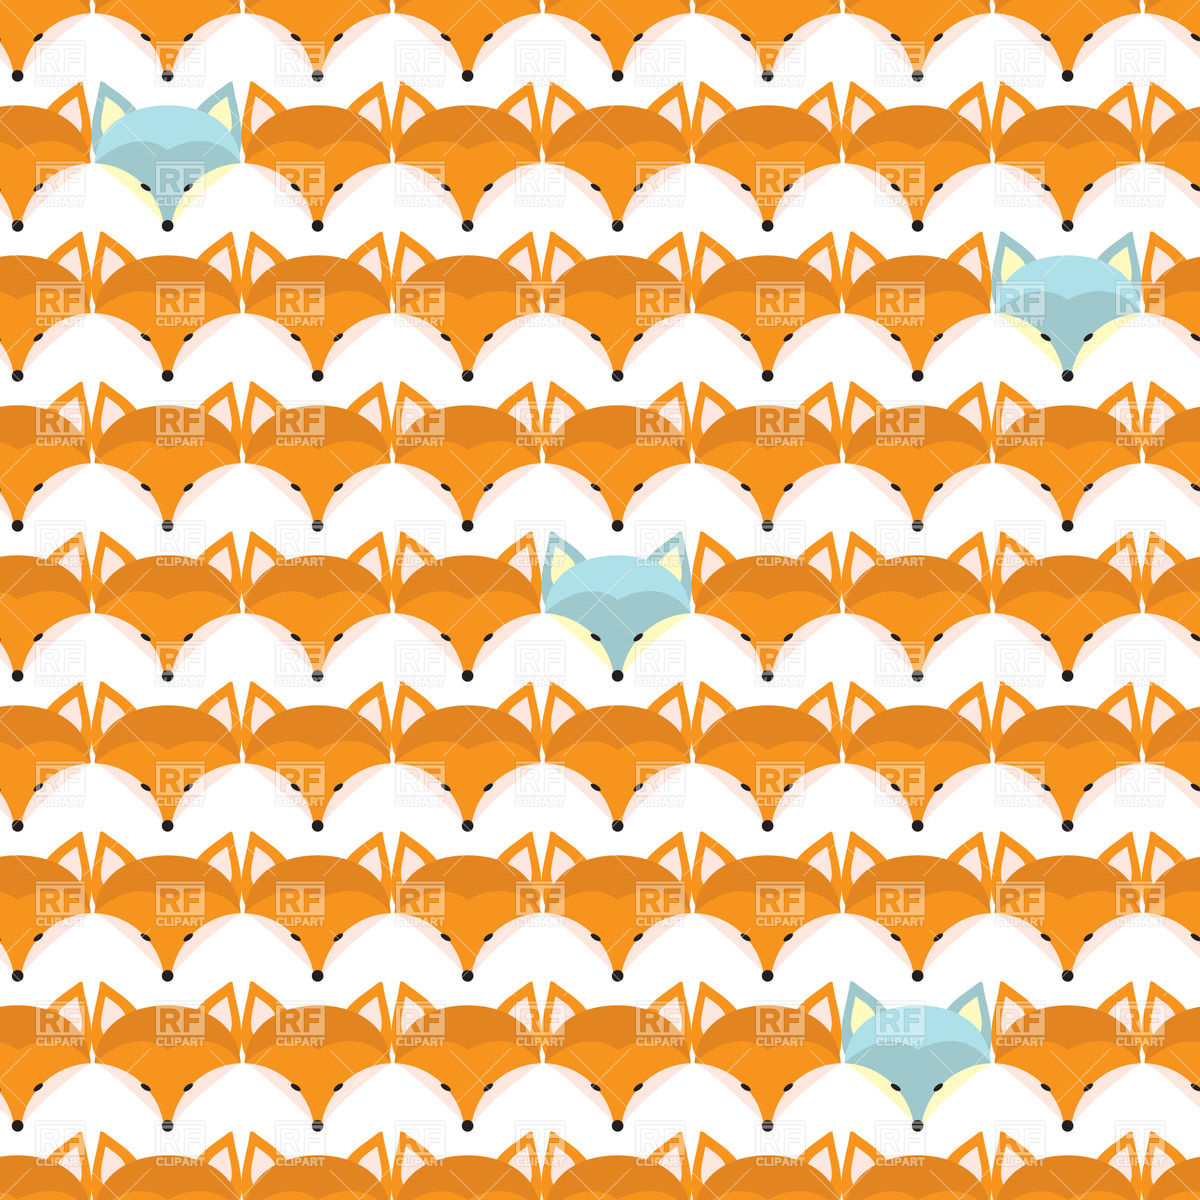 Seamless Pattern With Cute Cartoon Fox Faces Royalty